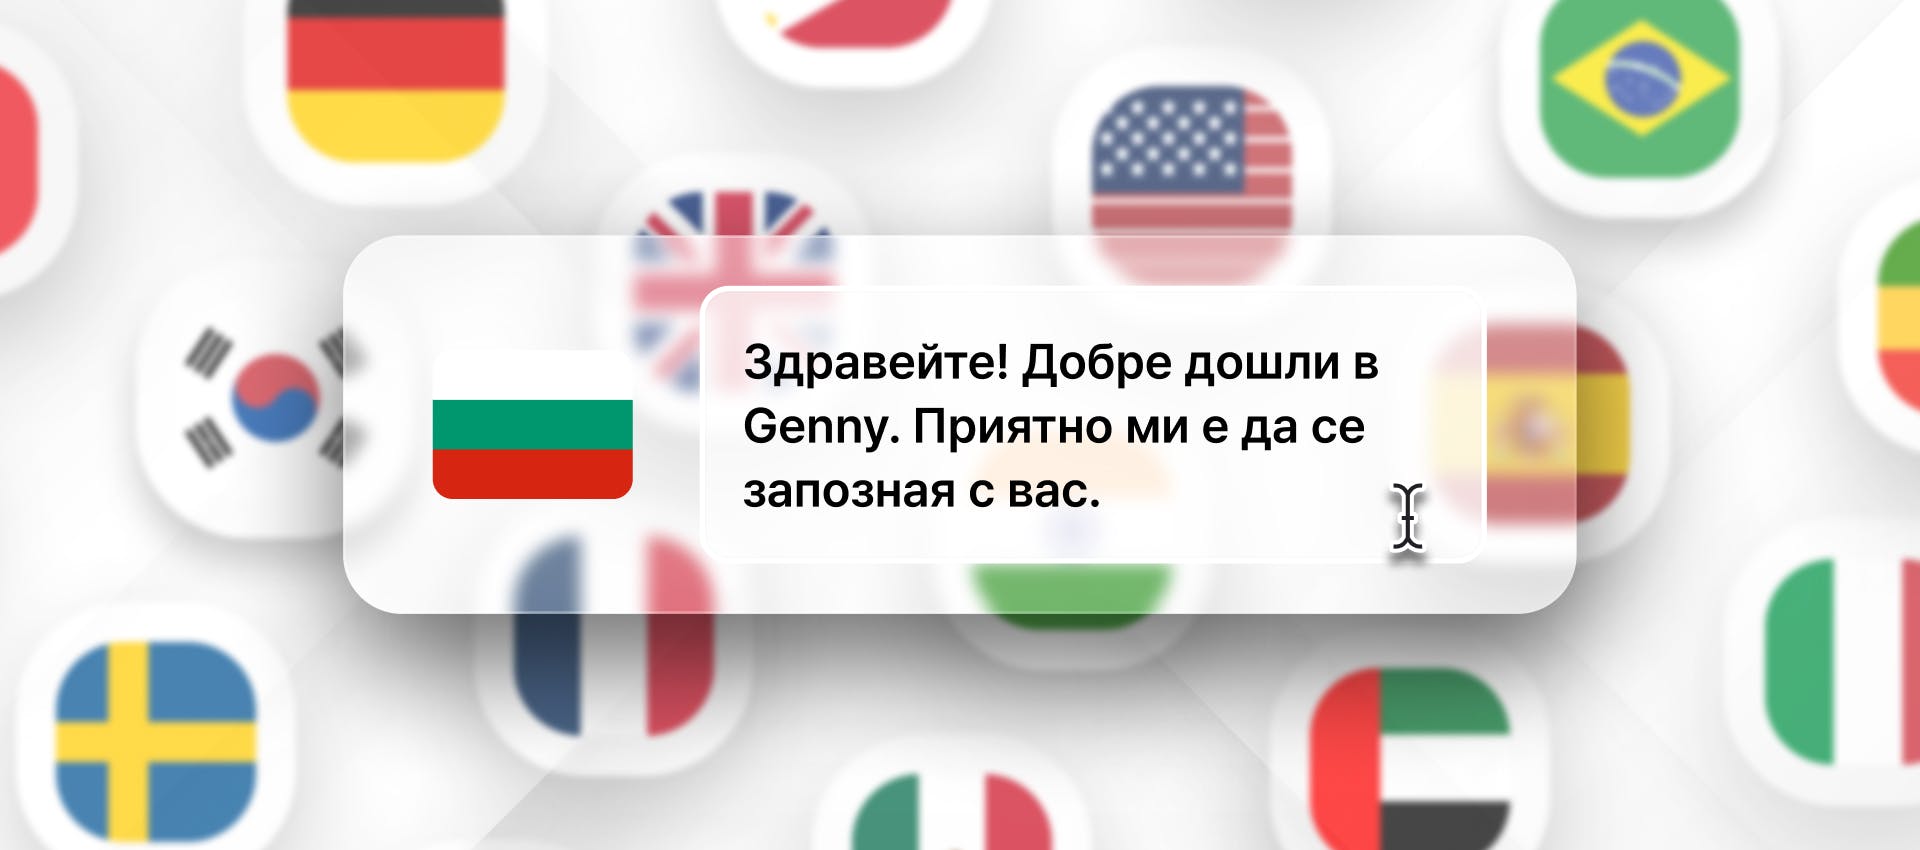 Bulgarian phrase for Bulgarian TTS generation with different flags in the background